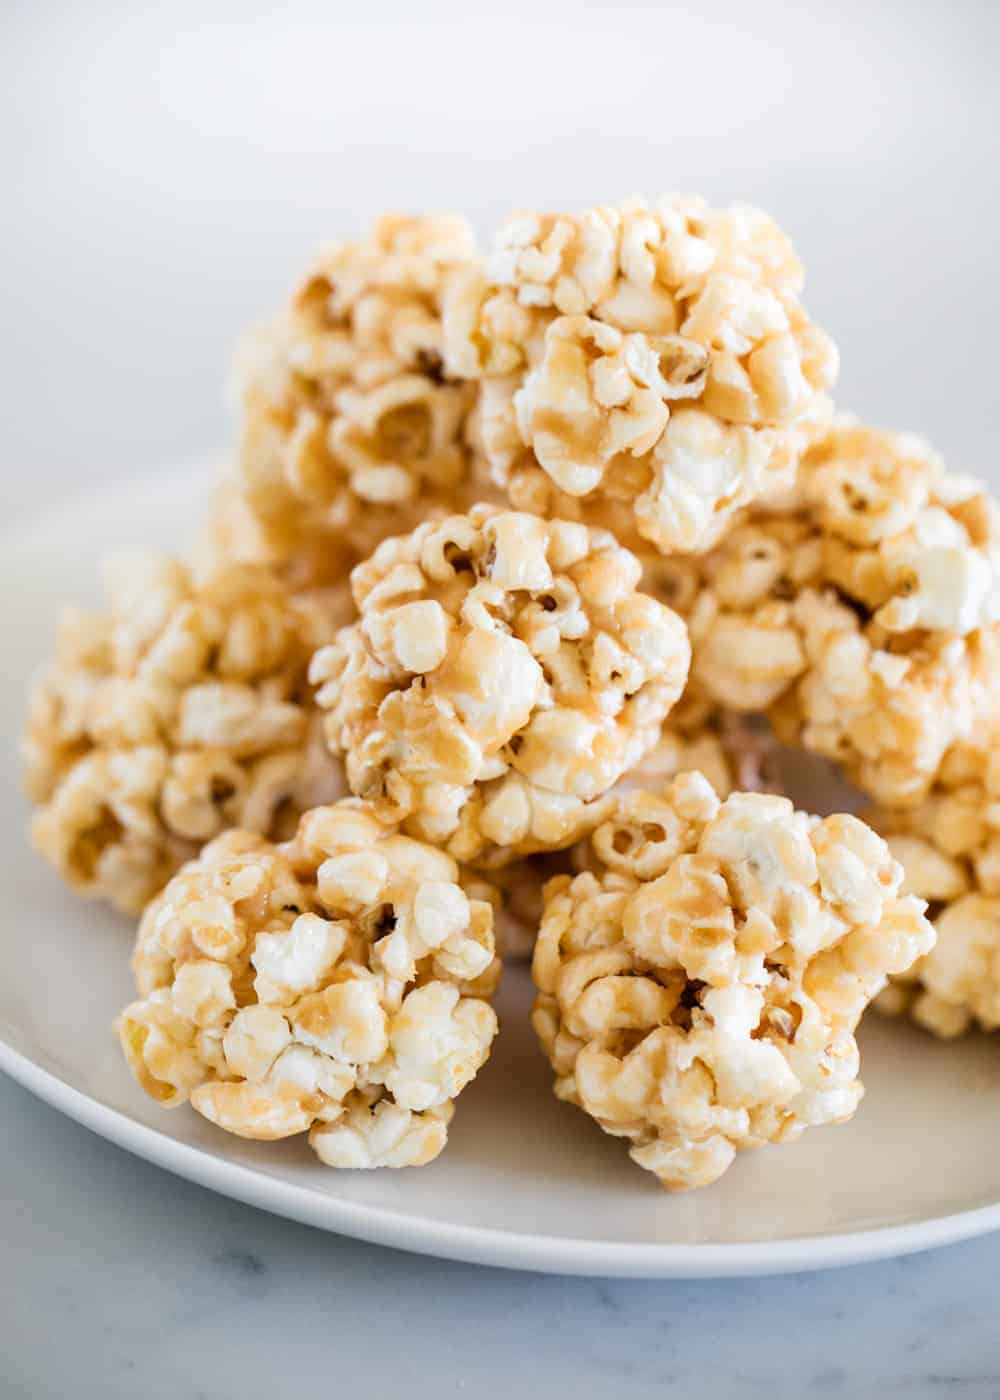 Popcorn balls stacked on white plate.